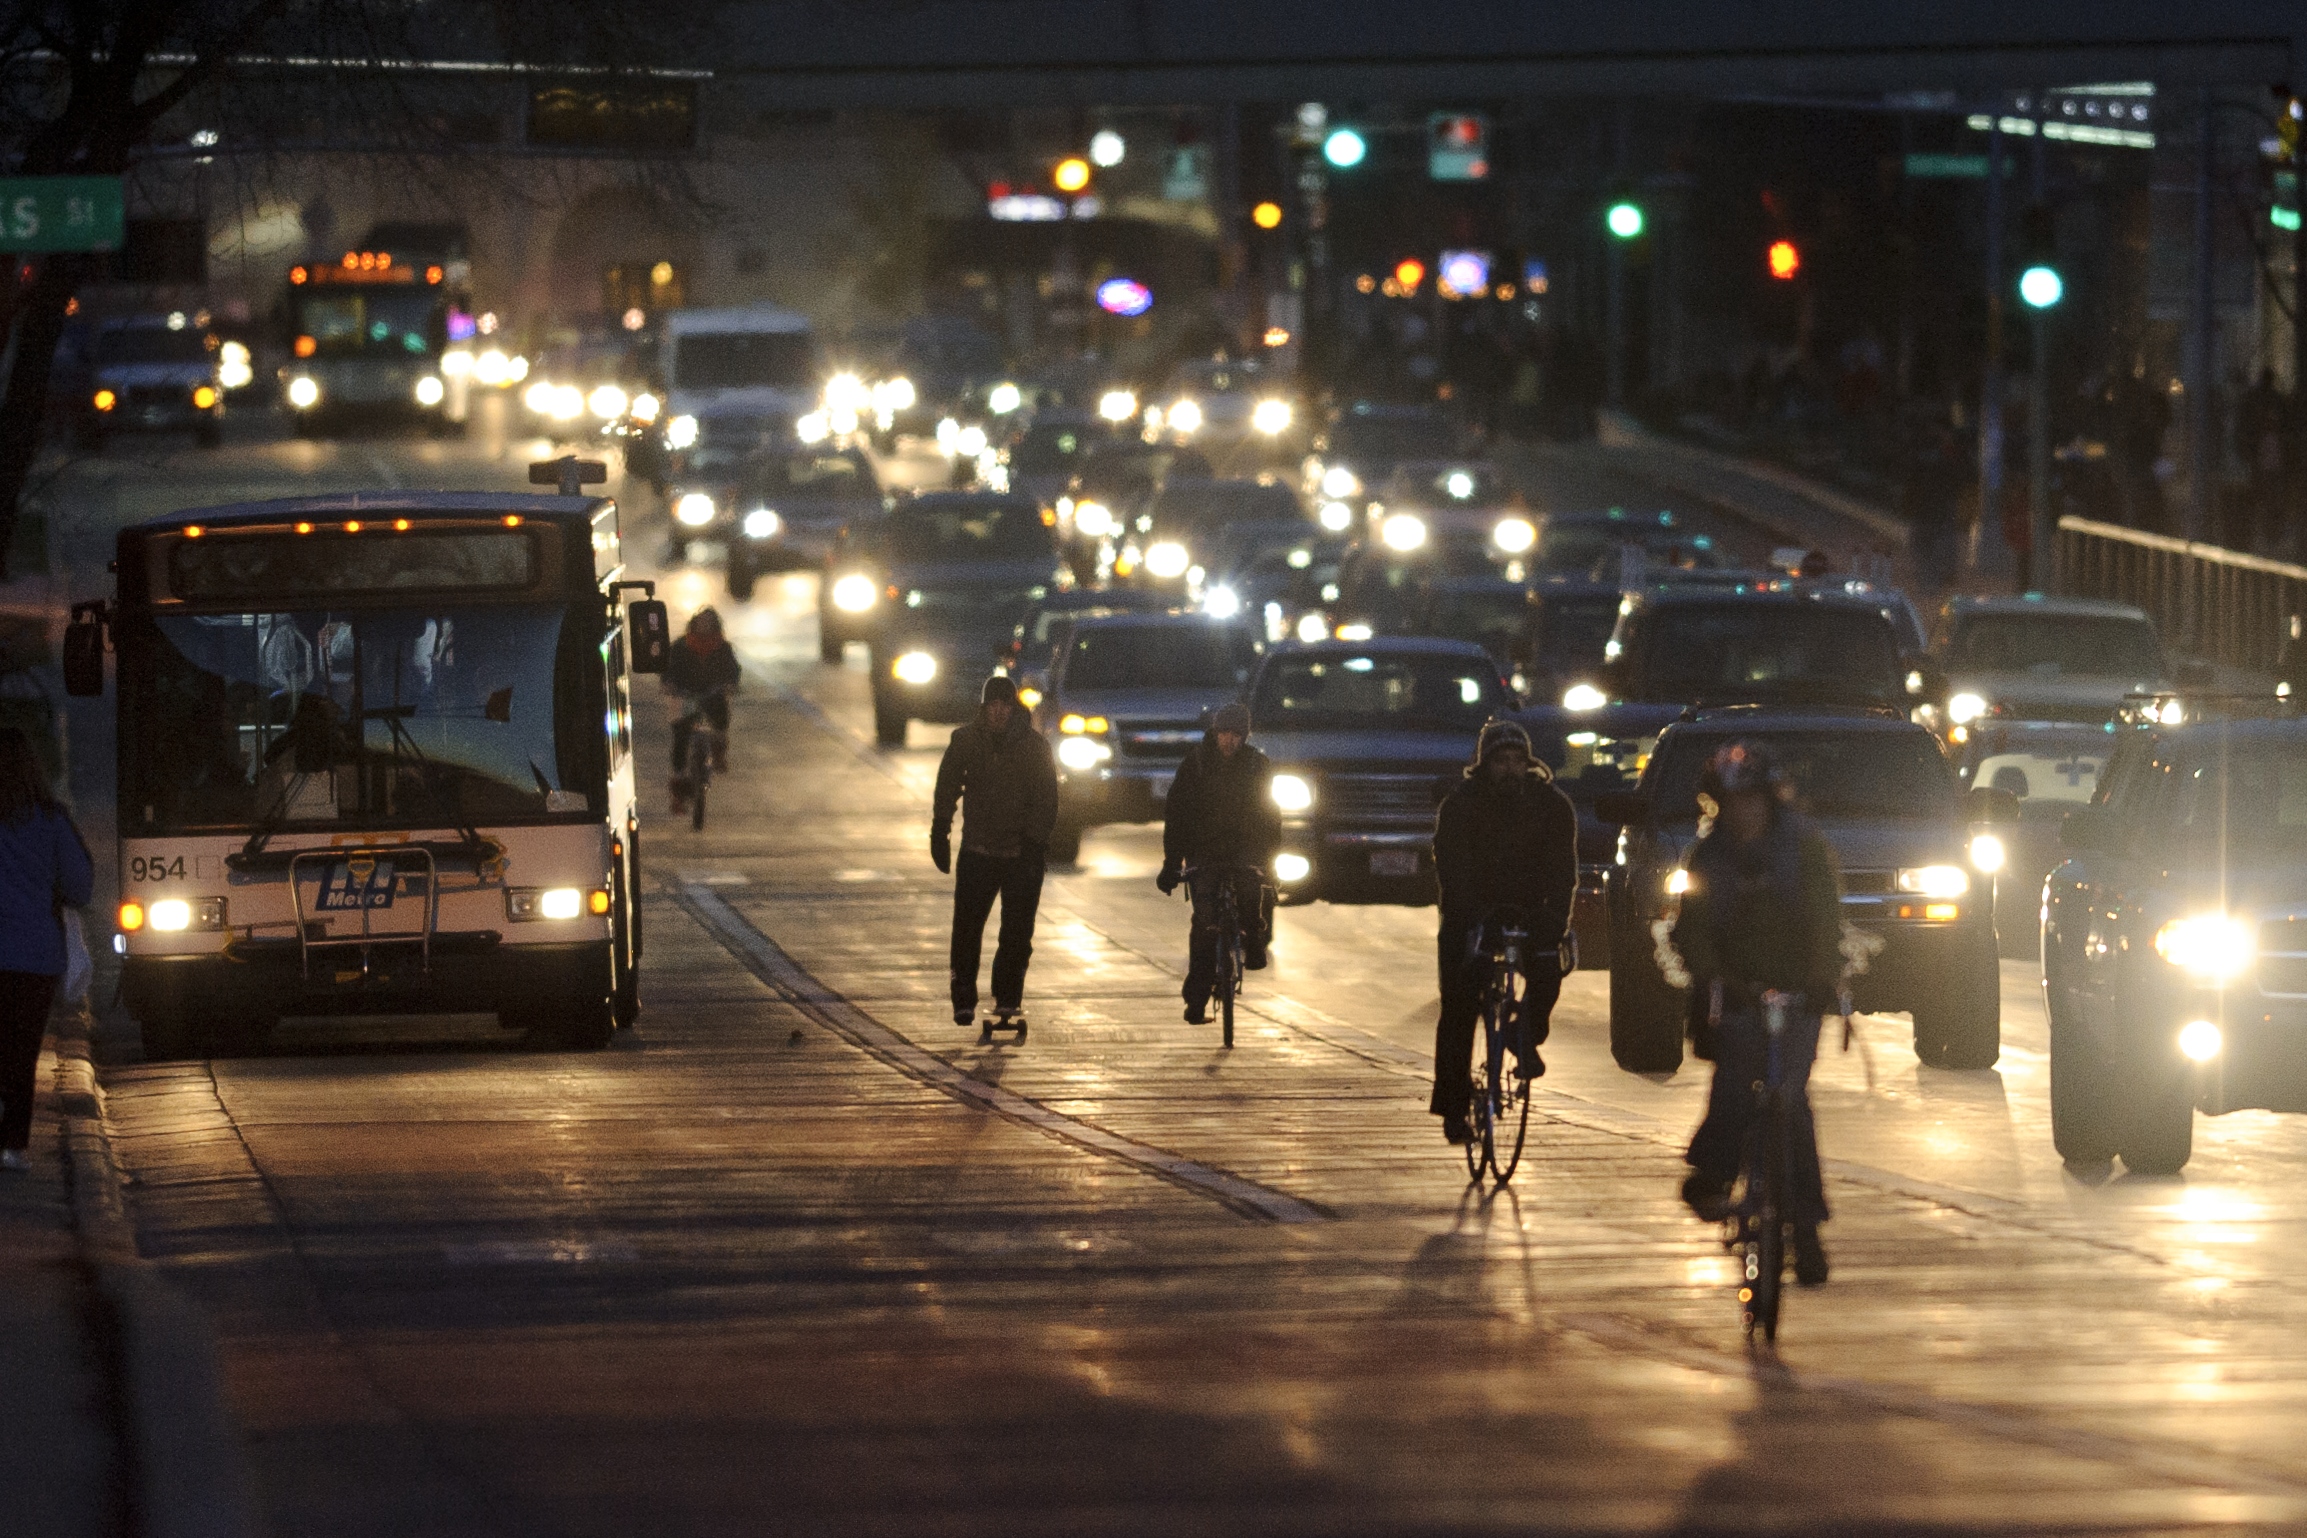 A skateboarder and bicyclists travel in the bike lane along University Avenue at nightfall against a backdrop of vehicle lights and rush hour-traffic.